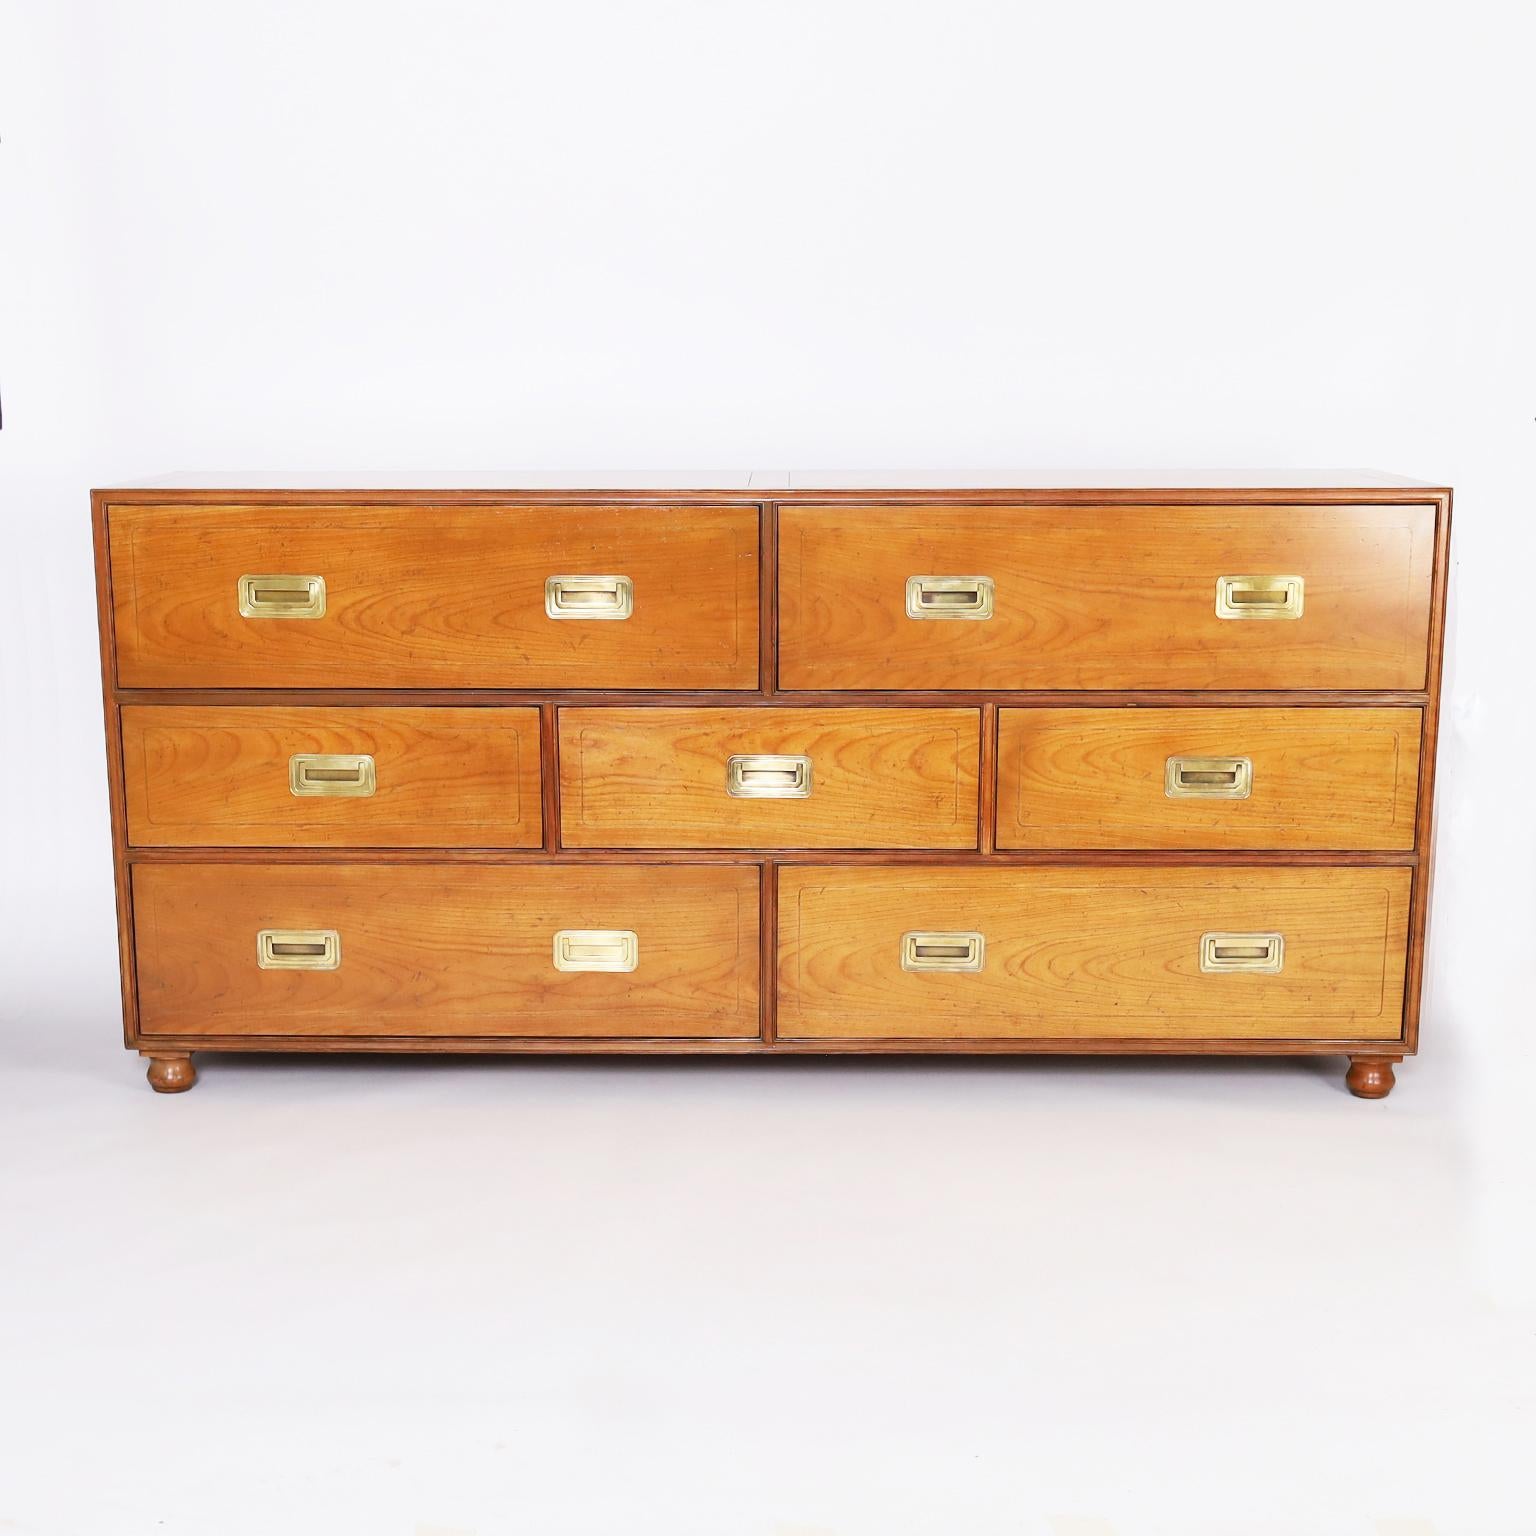 Handsome vintage campaign style chest or dresser crafted in fruitwood with seven drawers, brass hardware, and turned feet. Perfect marriage of modern and traditional design, signed Baker in a drawer.